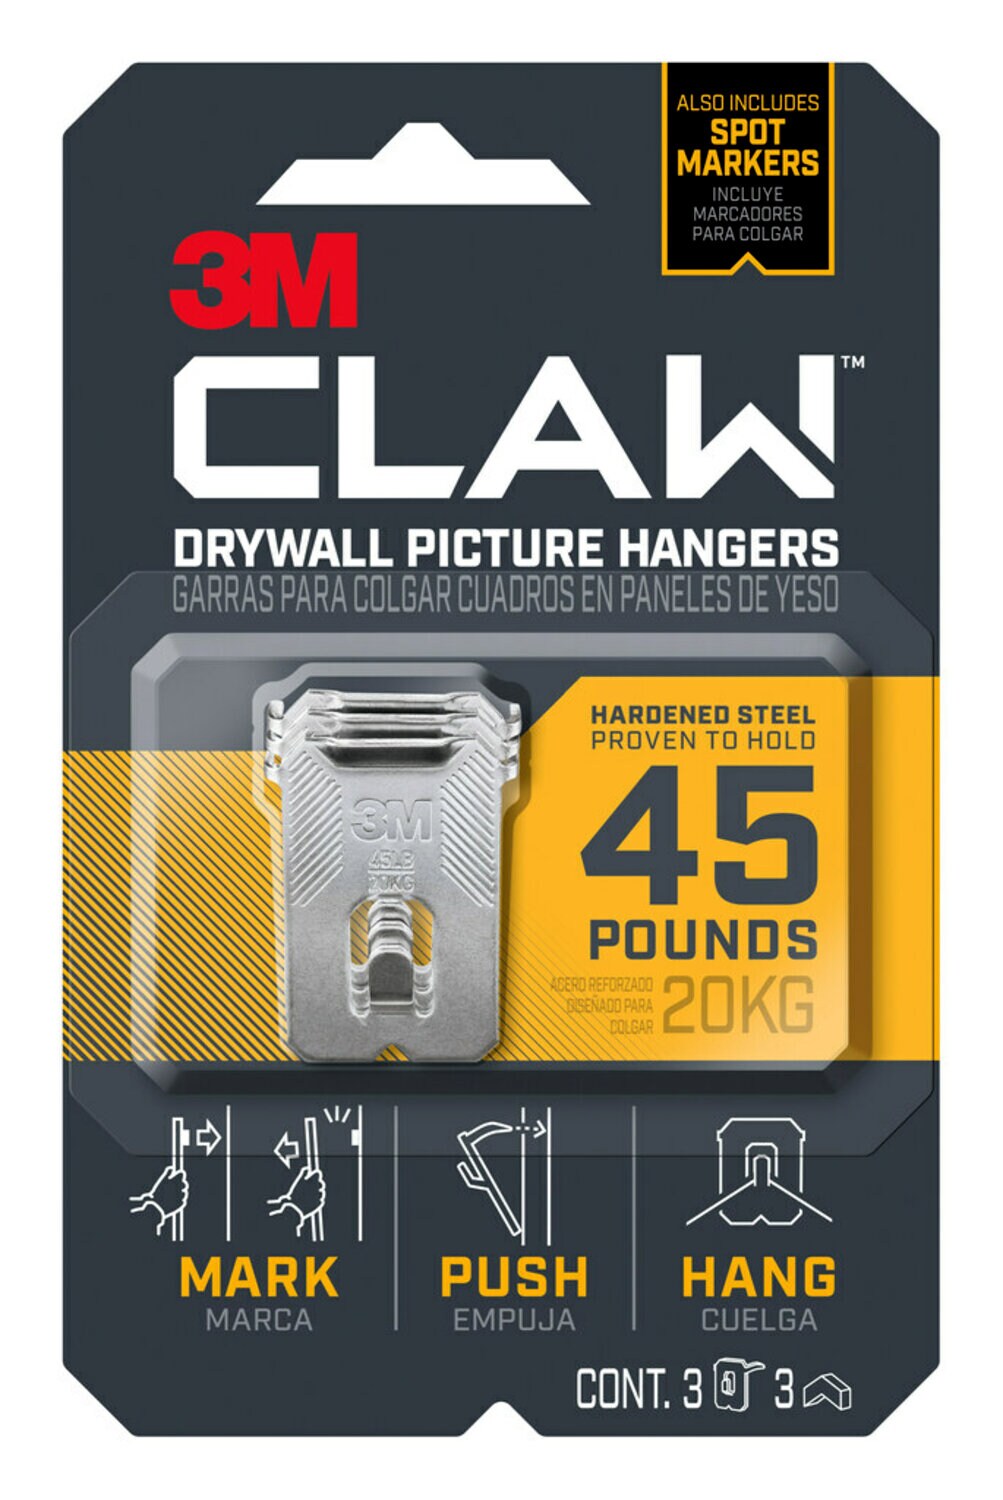 7100227271 - 3M CLAW Drywall Picture Hanger 45 lb with Temporary Spot Marker 3PH45M-3EF, 3 hangers, 3 markers